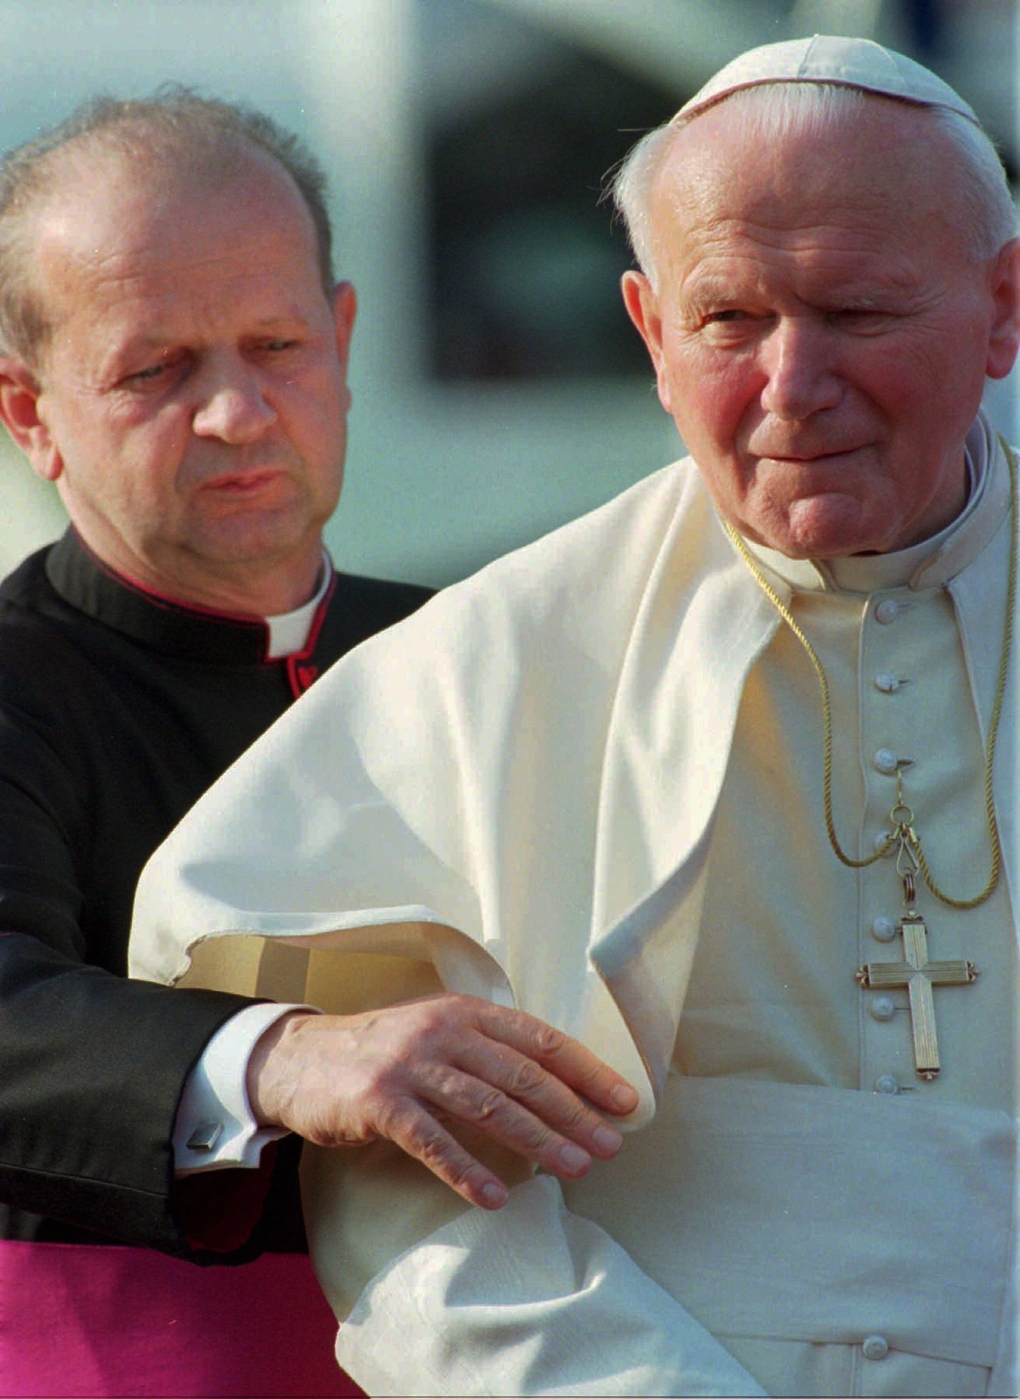 No-frills canonizations planned for popes